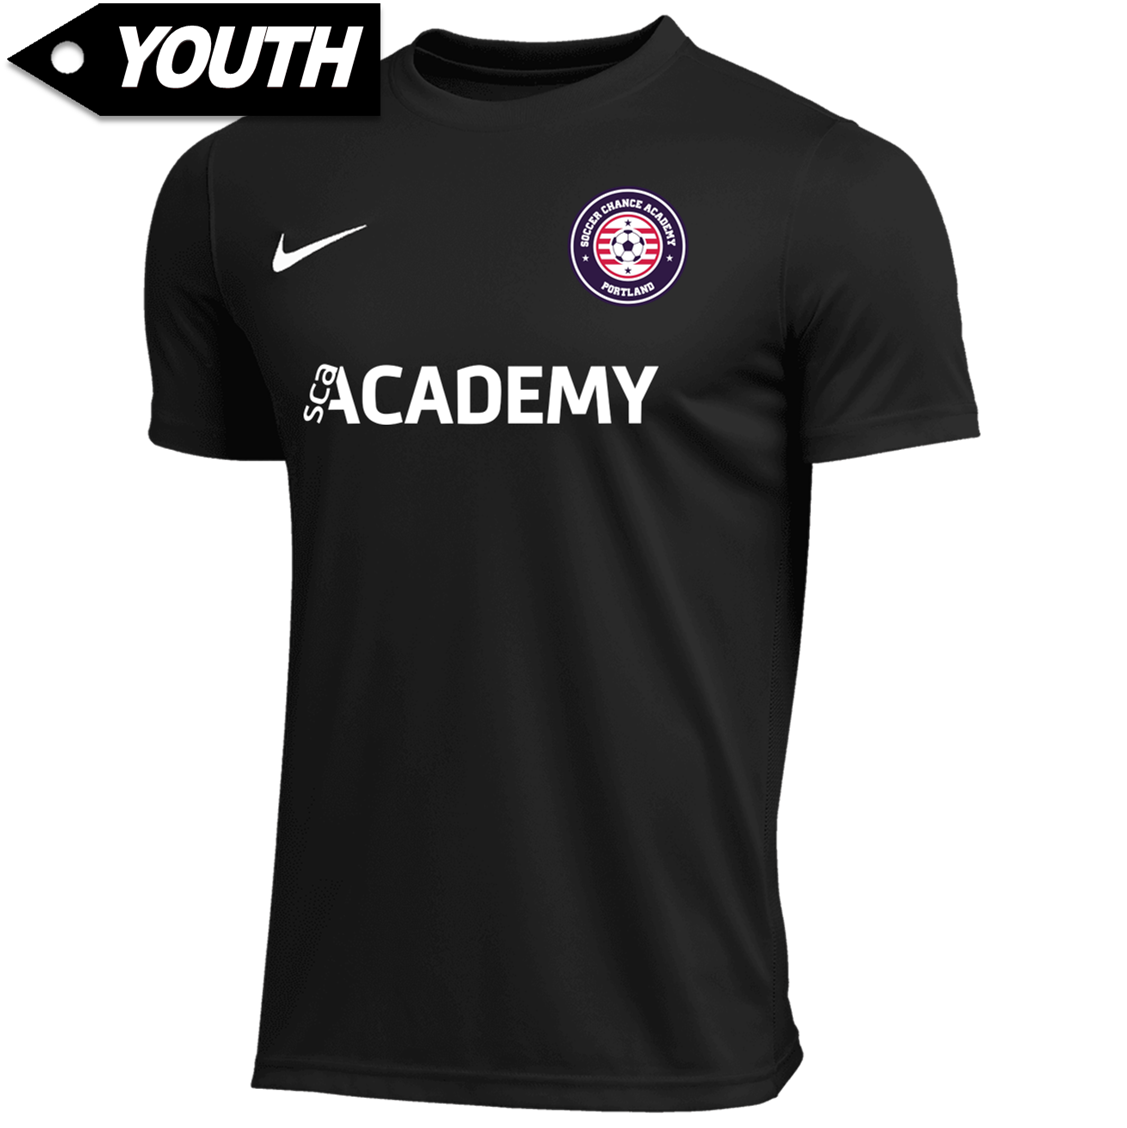 SCA Training Jersey [Youth]